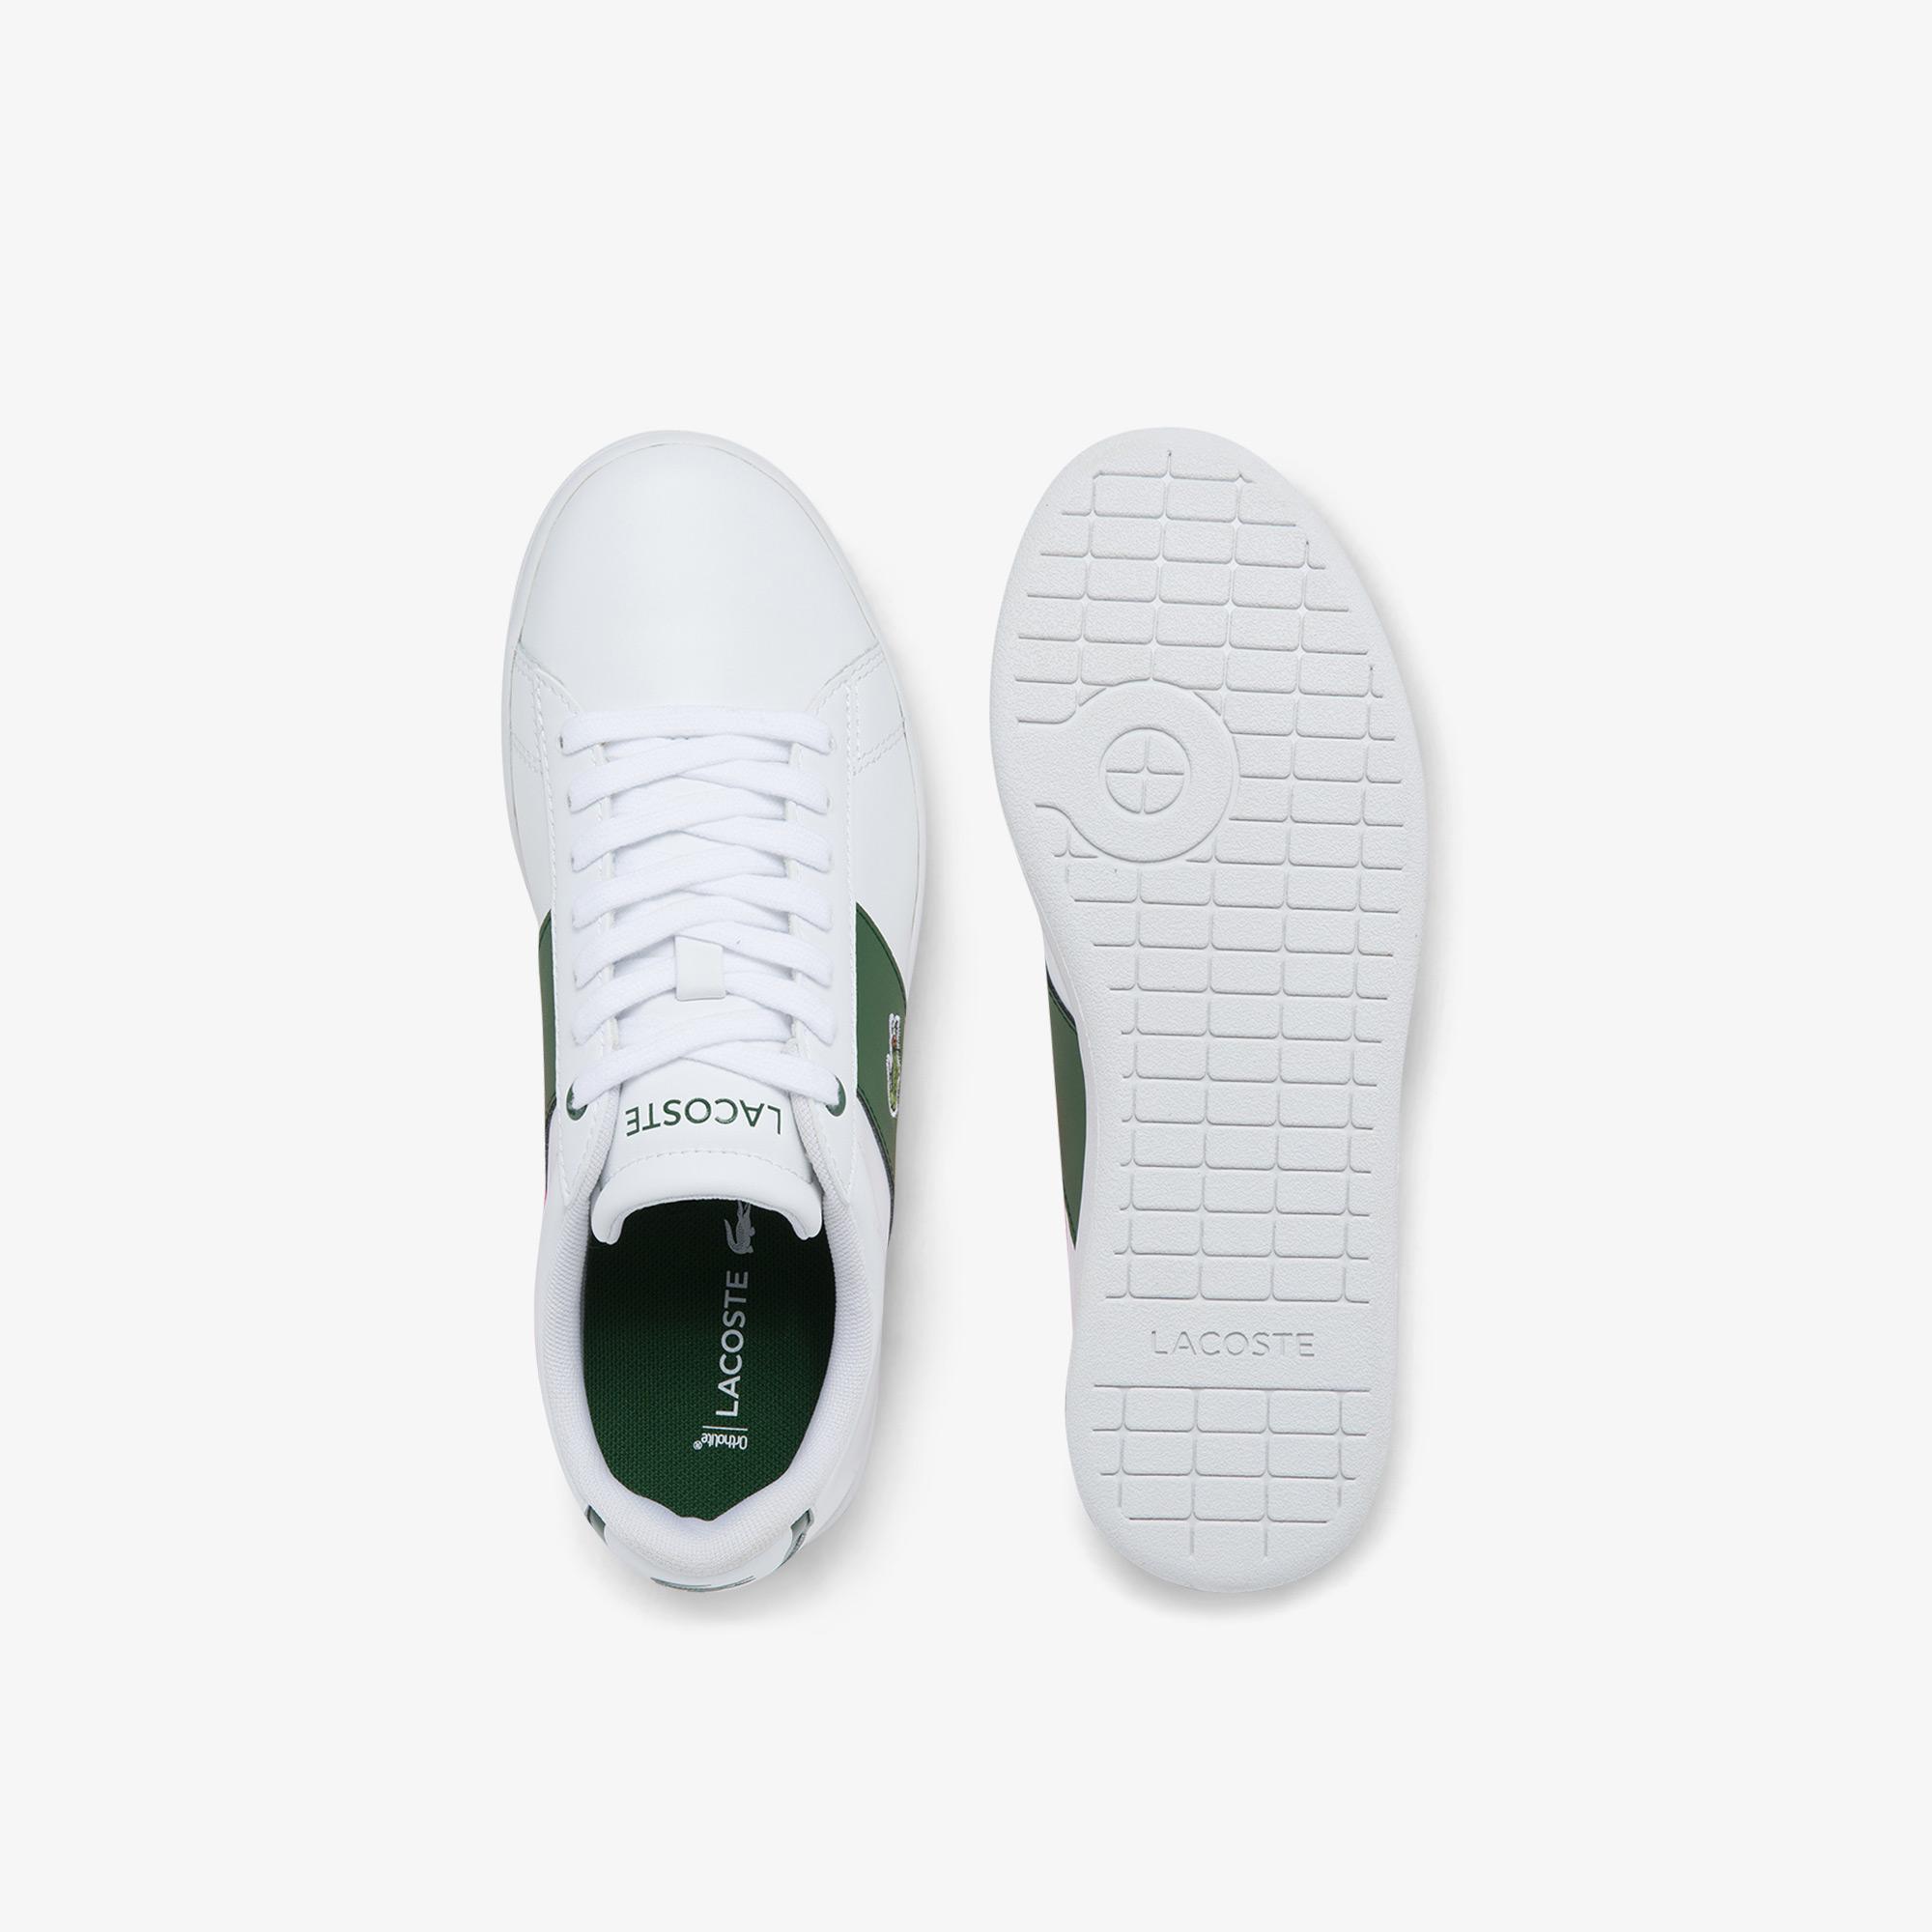 Lacoste Women's Carnaby Evo Leather Contrast Quarter Sneakers